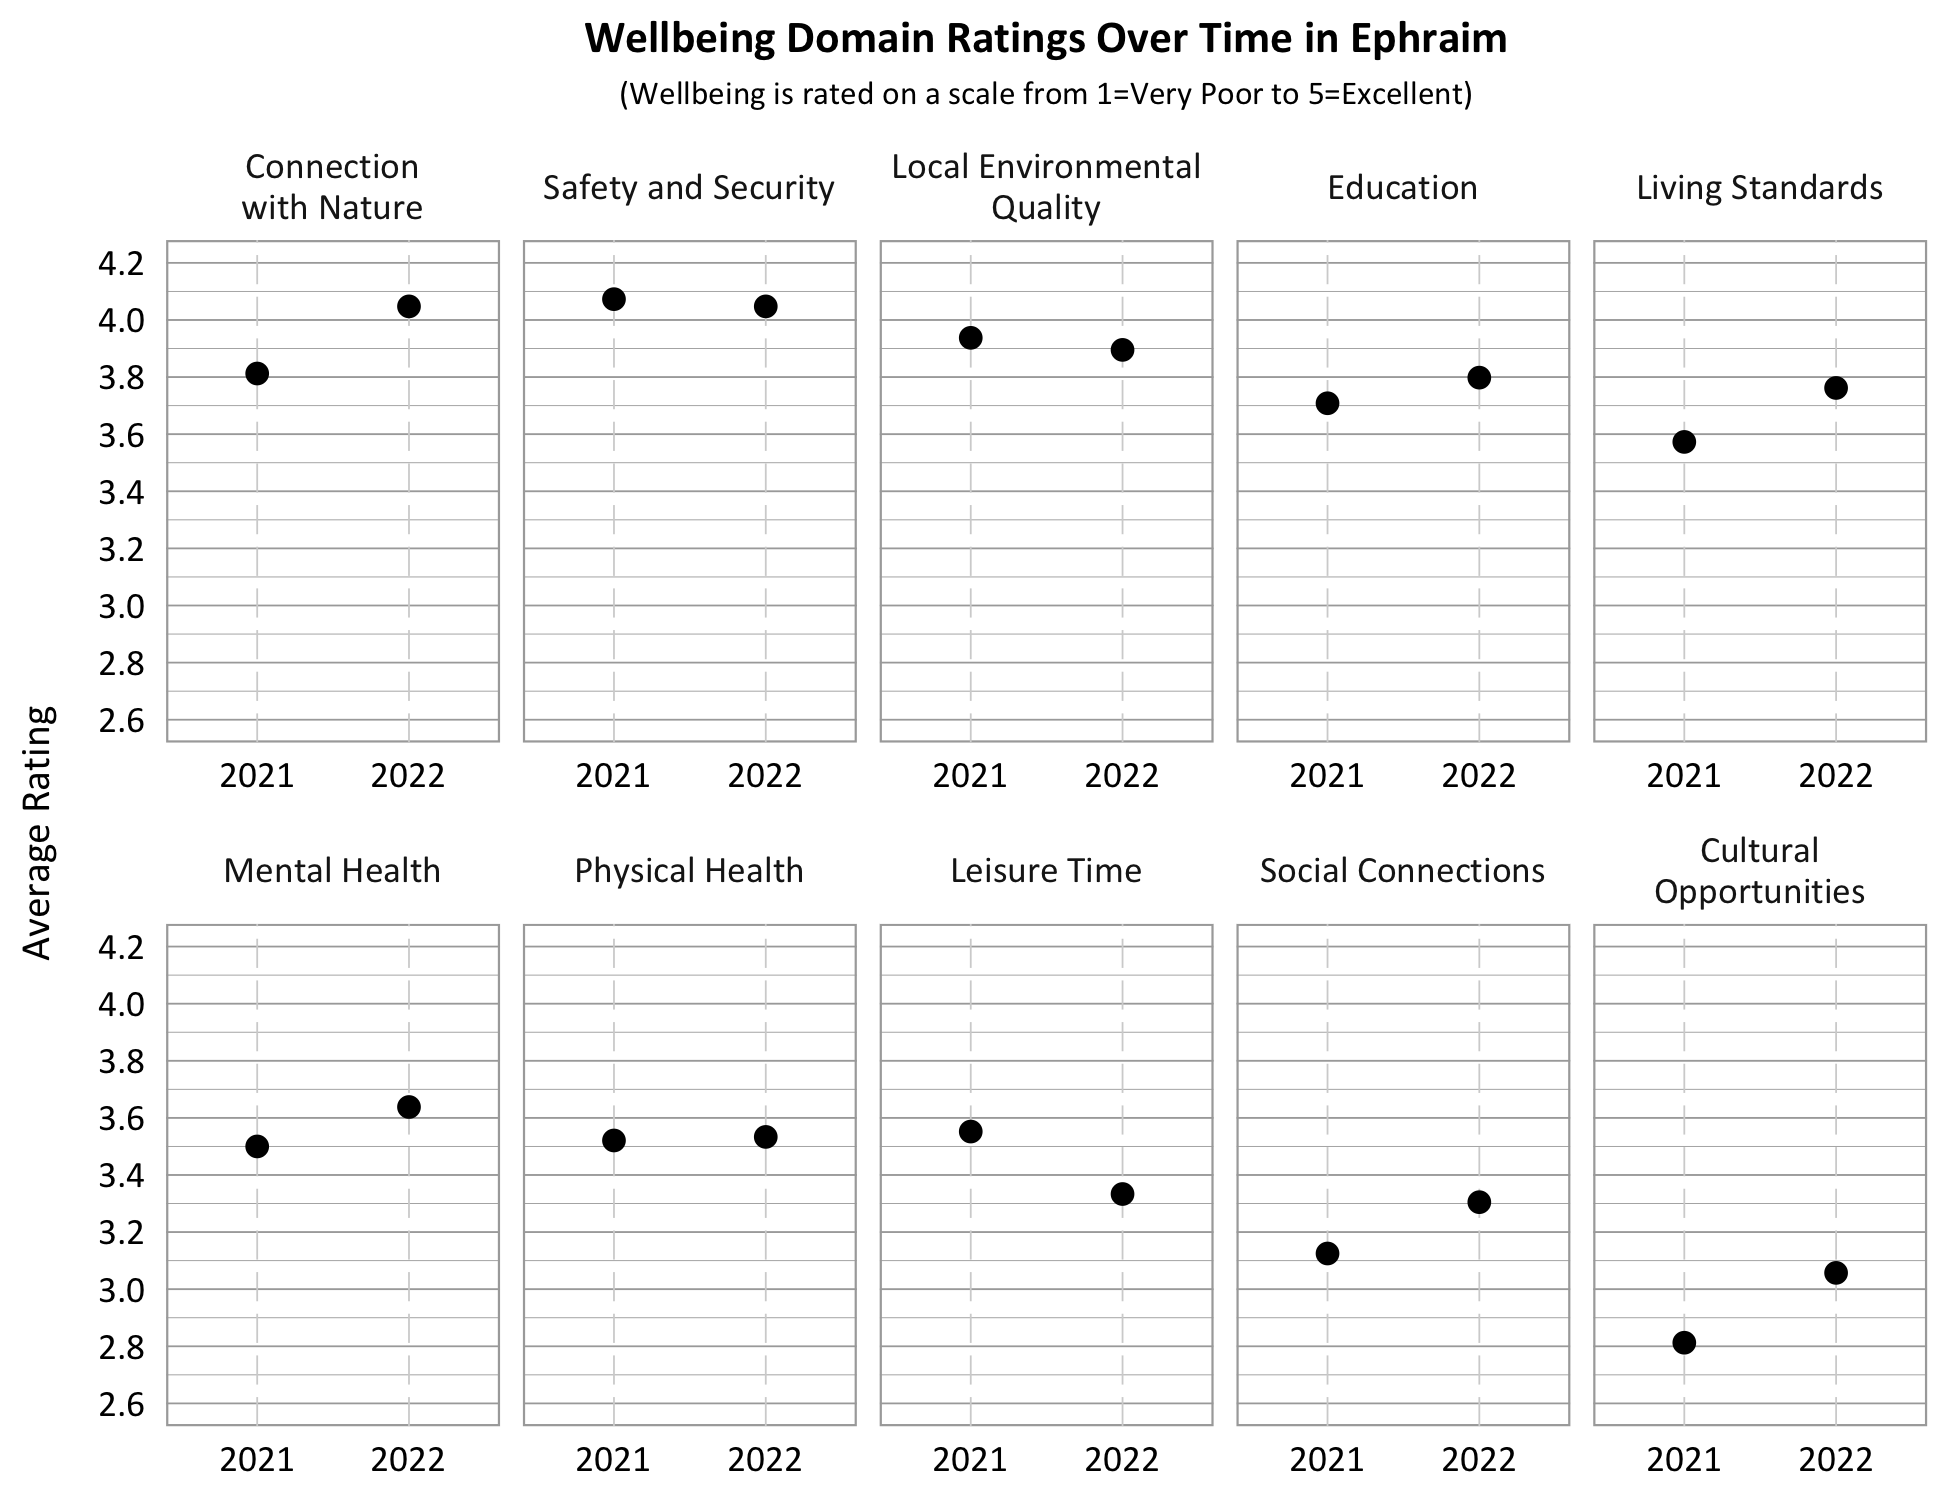 Dot Plot. Title: Wellbeing Domain Ratings Over Time in Ephraim, Subtitle: Wellbeing is rated on a scale from 1=Very Poor to 5=Excellent. Category: Living Standards- 2021- 3.6, 2022- 3.8; Category: Safety and security- 2021- 4.05 2022- 4.05; Category: Connection with Nature- 2021- 3.8, 2022- 4.05, Category: Education- 2021- 3.7, 2022- 3.8; Category: Physical Health: 2021- 3.5; 2022 3.55; Category: Mental Health- 2021- 3.5, 2022- 3.65; Category: Local Environmental Quality- 2021- 3.95, 2022- 3.9; Category: Leisure Time- 2021- 3.55, 2022- 3.35, Category: Social Connection- 2021- 3.1; 2022- 3.3, Category: Cultural Opportunities- 2021- 2.8, 2022- 3.1. 